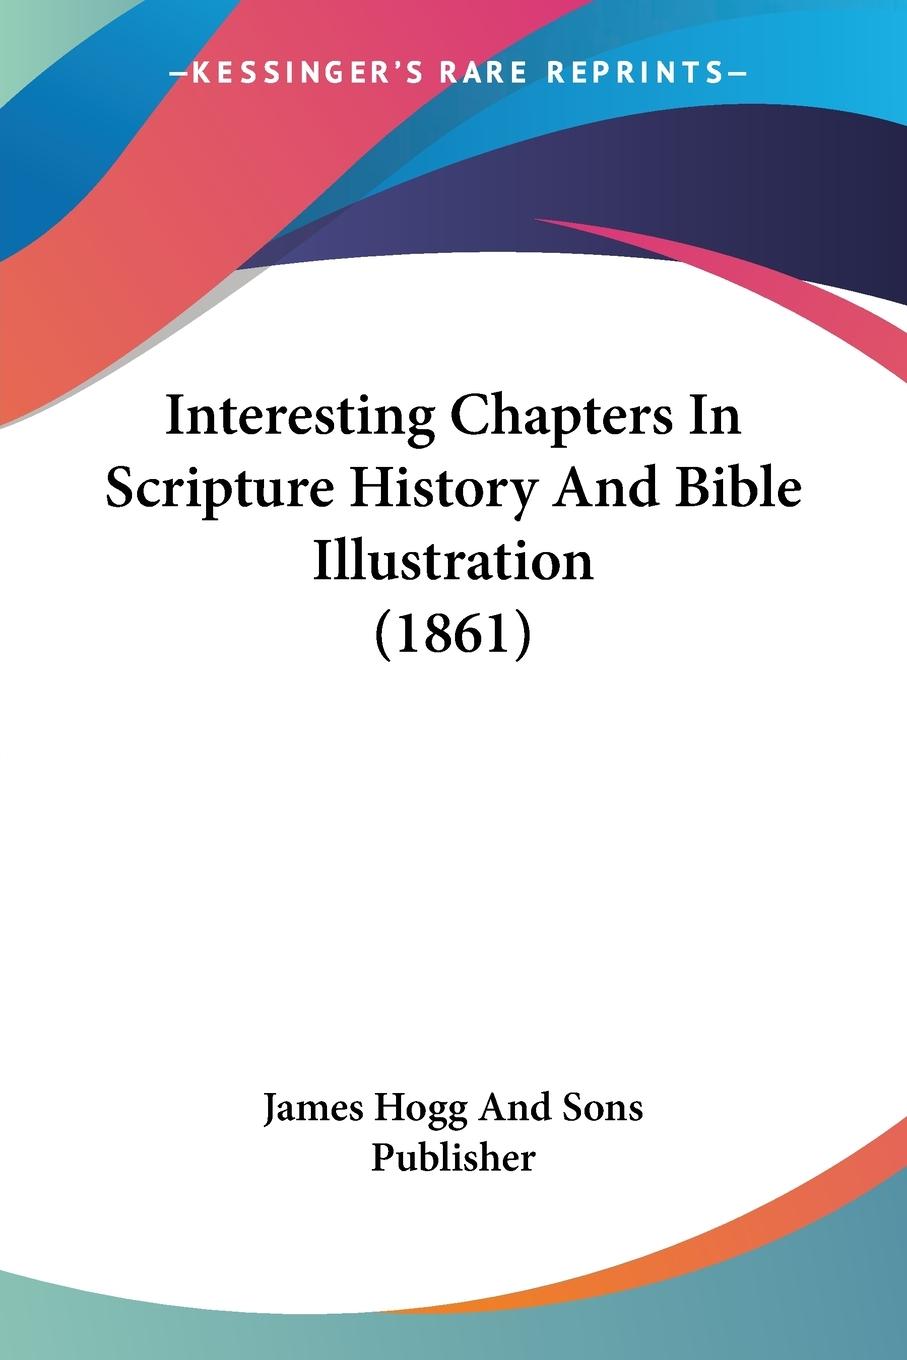 Interesting Chapters In Scripture History And Bible Illustration (1861) - James Hogg And Sons Publisher